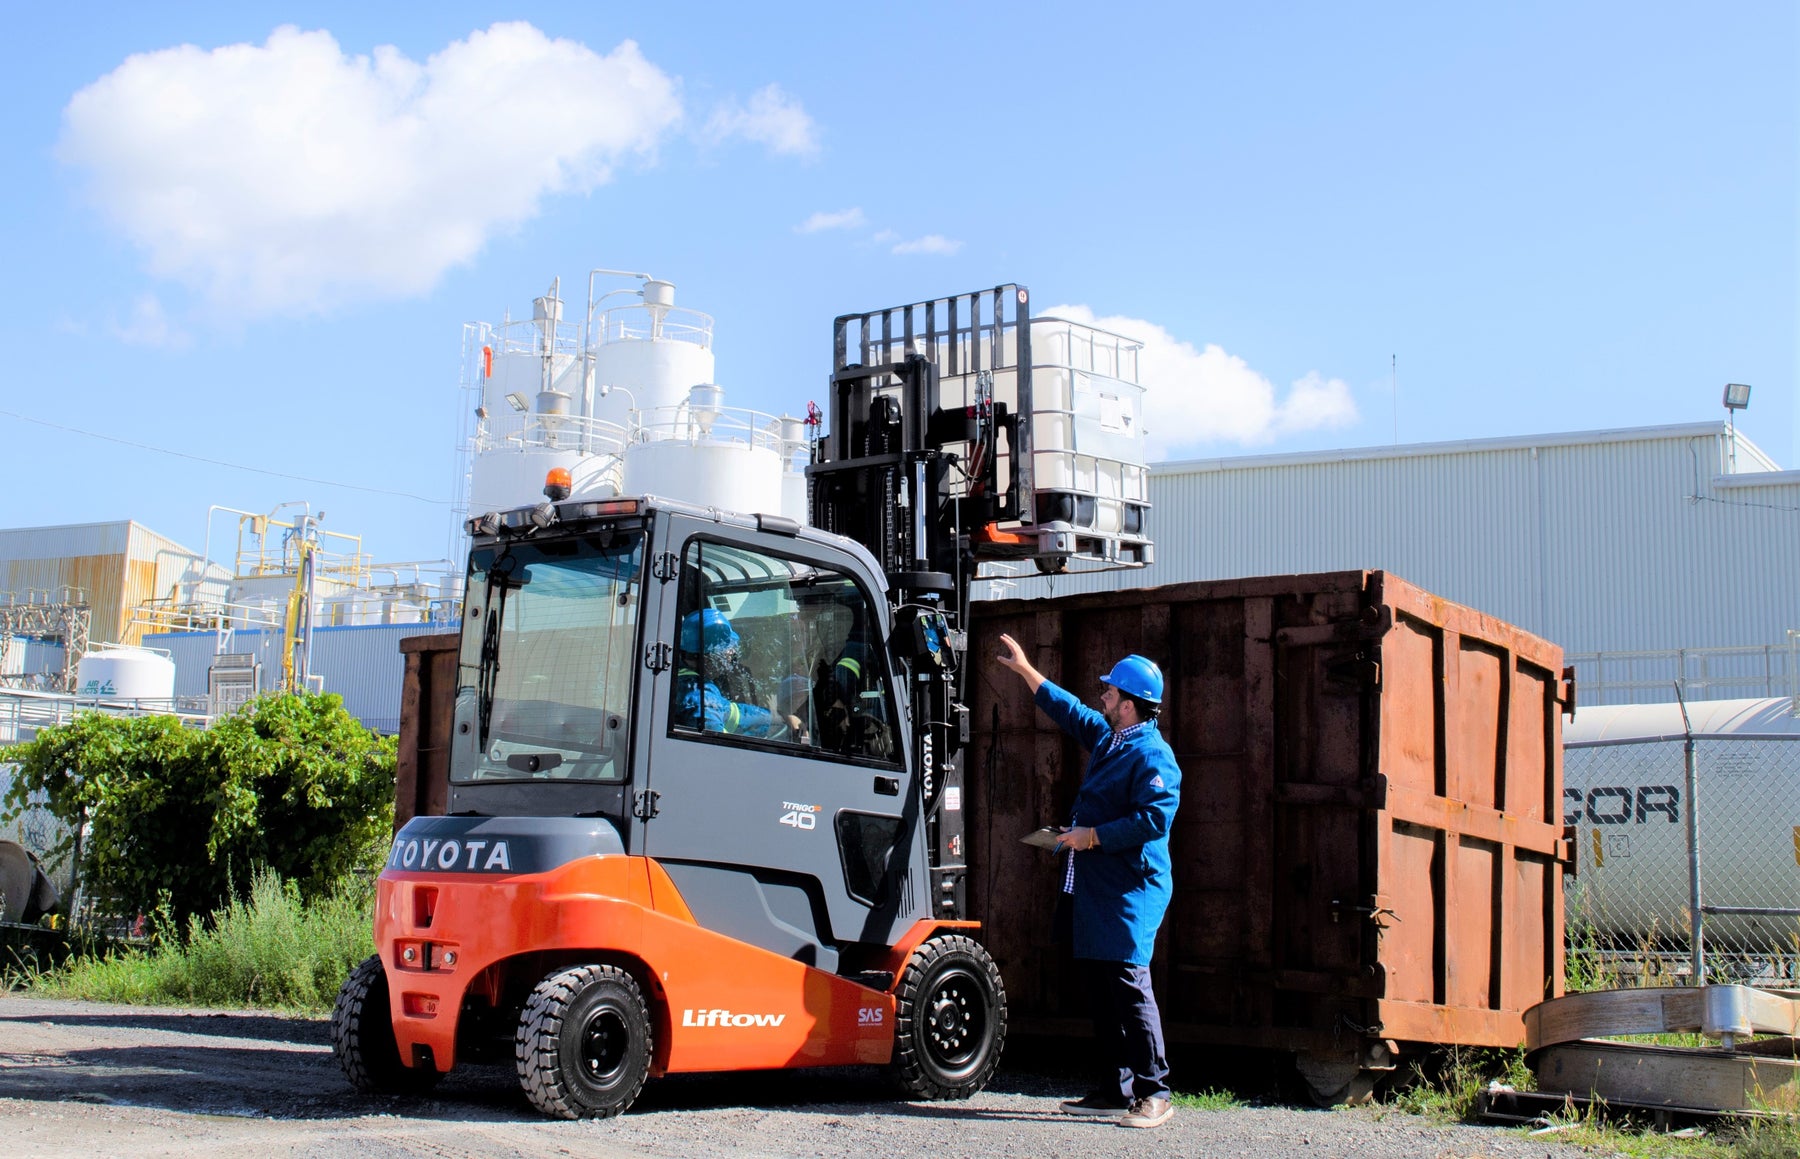 Choosing Customized Forklift Training Courses